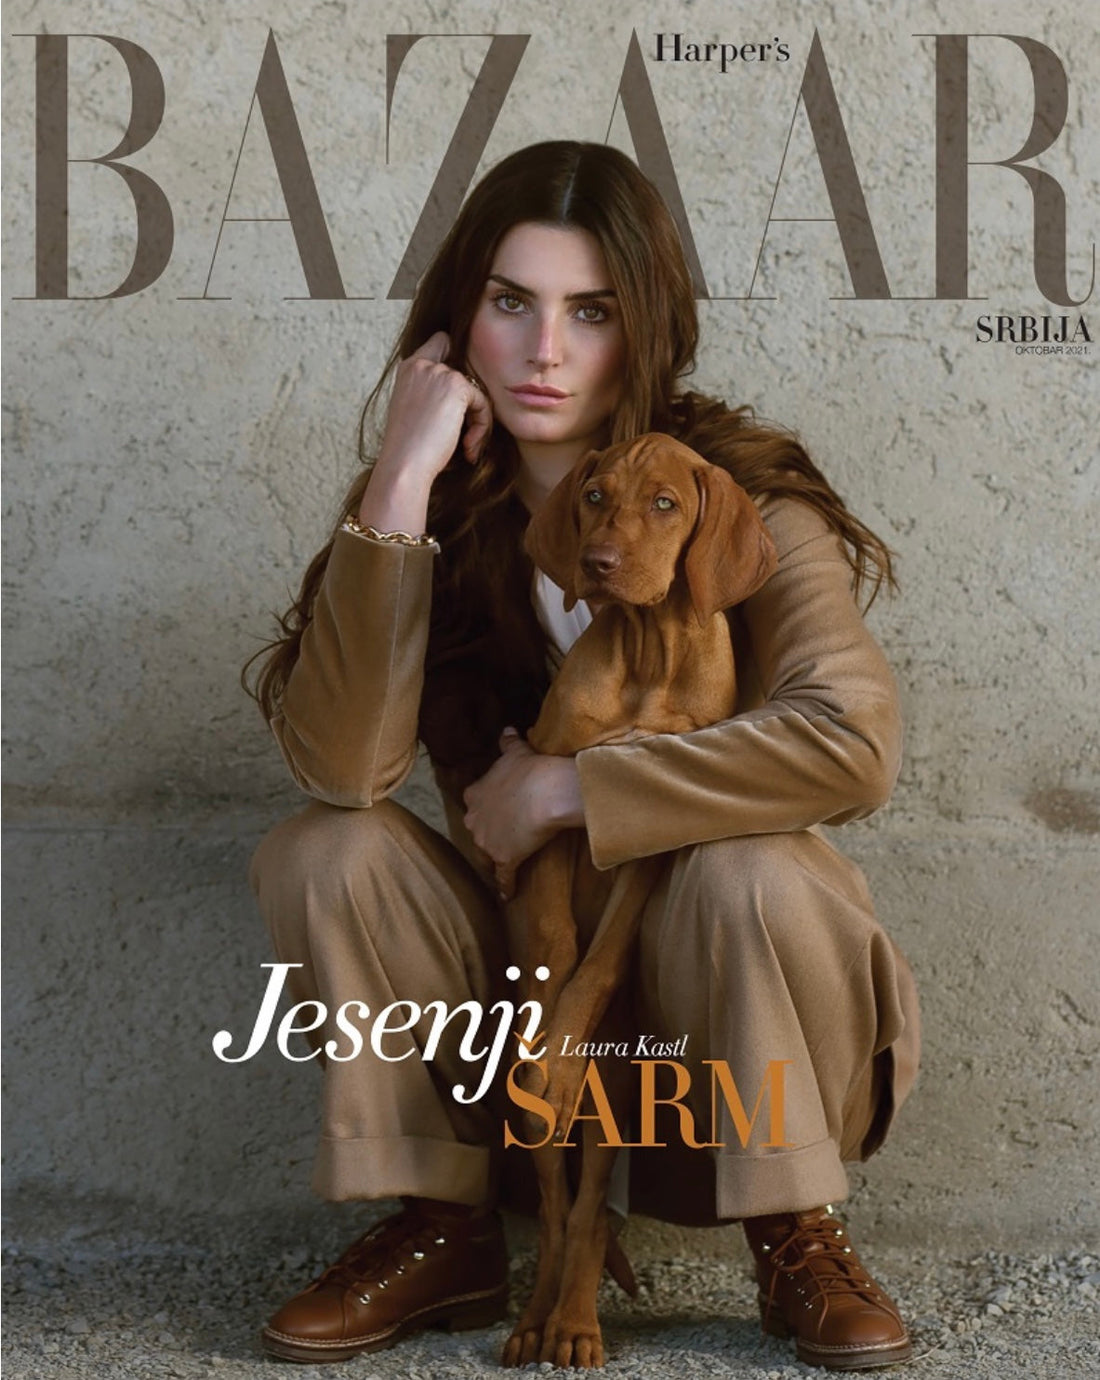 WE ARE IN THE NEW EDITION OF THE HARPER'S BAZAAR SERBIA